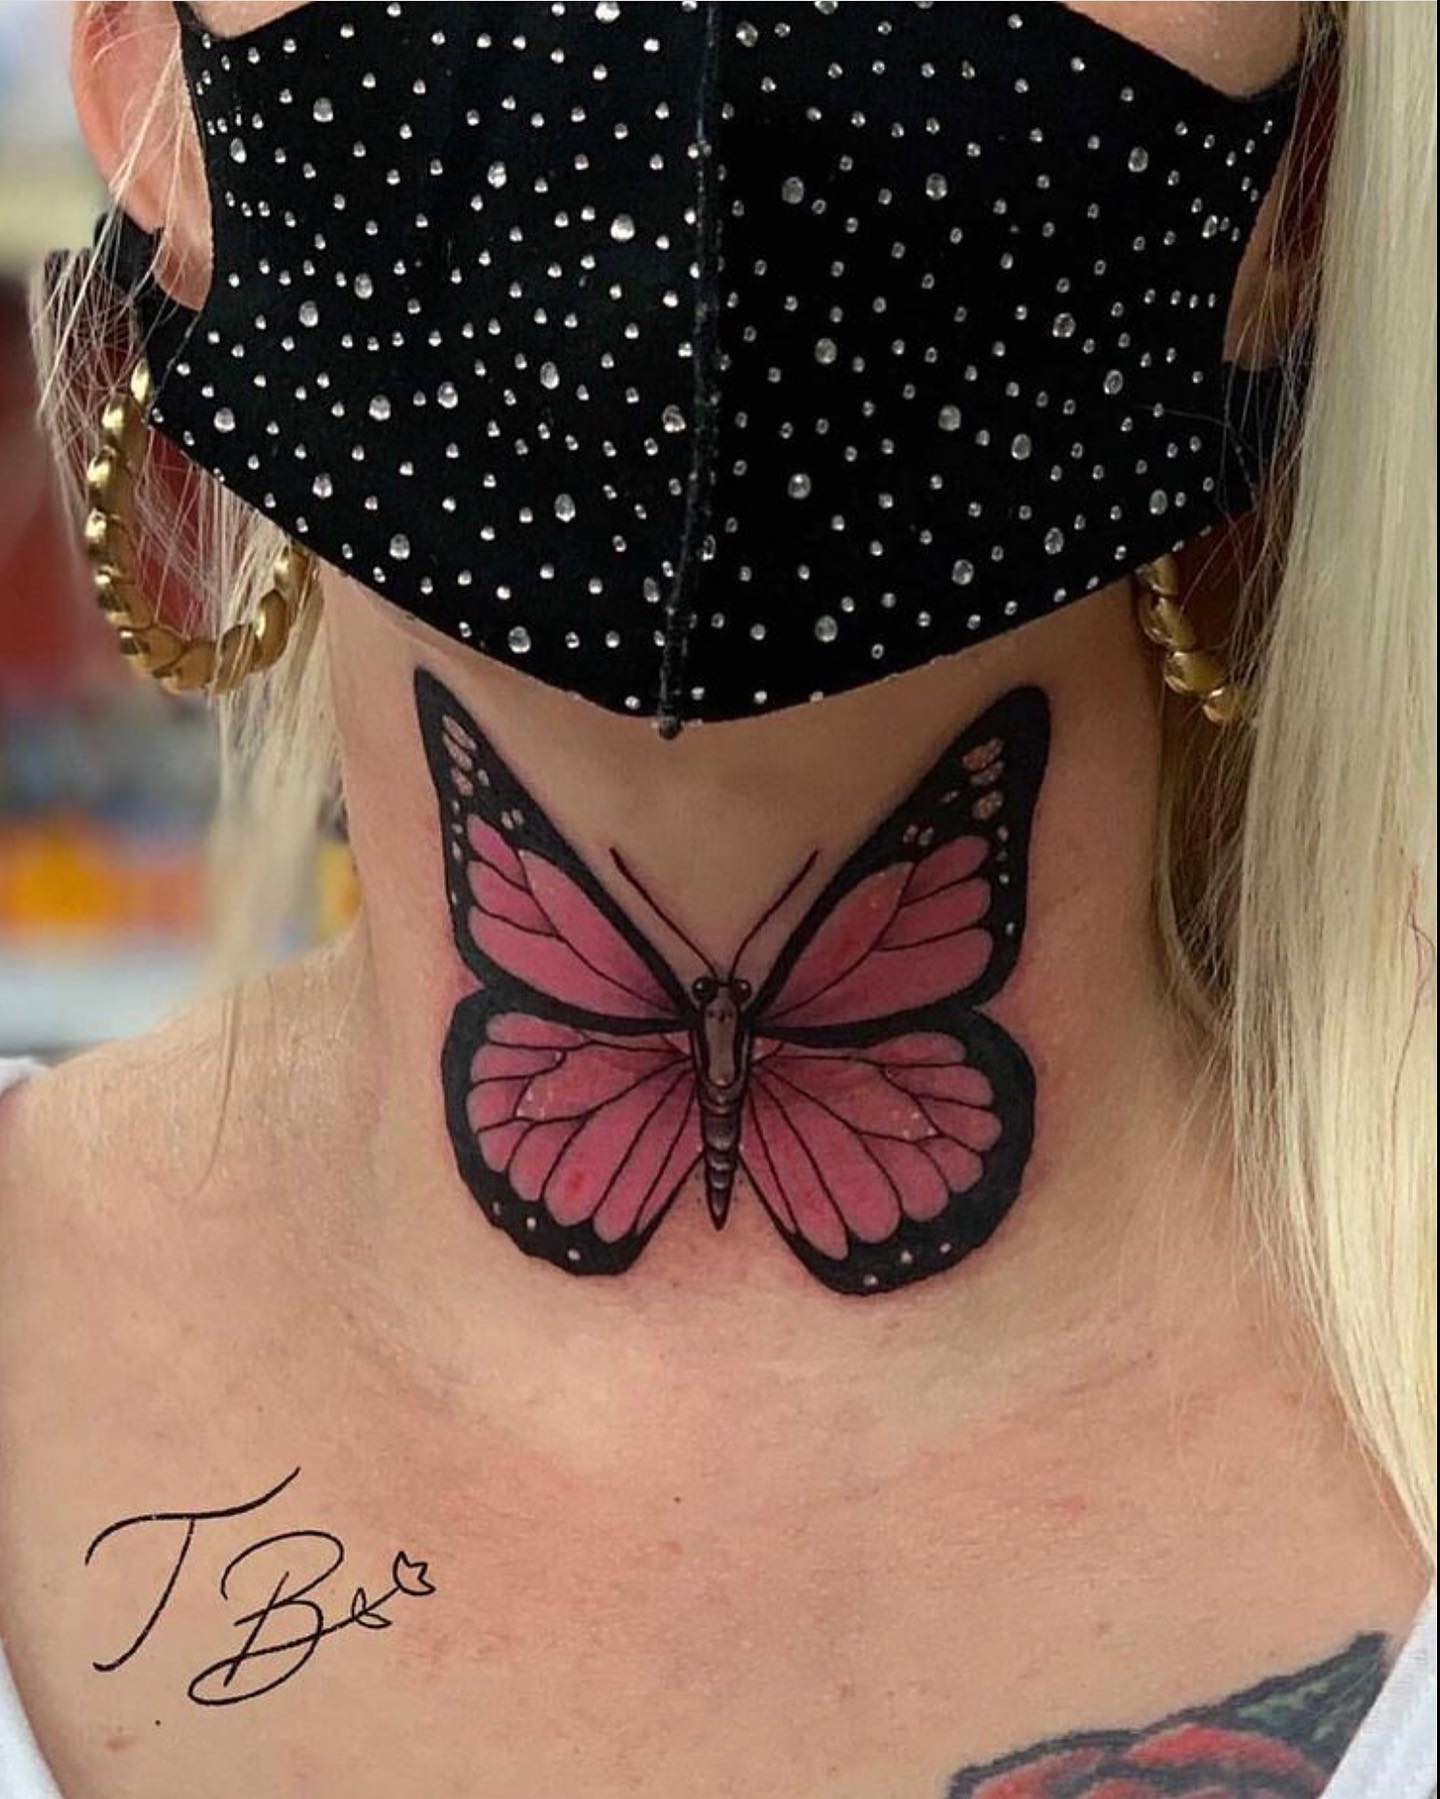 A delicate throat tattoo from the butterfly queen thaisblanc 🦋
•
She will be closing her books soon as she is booking up most of the year. If you’re hoping to get tattooed by her, please email her through the link in her Instagram bio or email the shop ✨
•
     